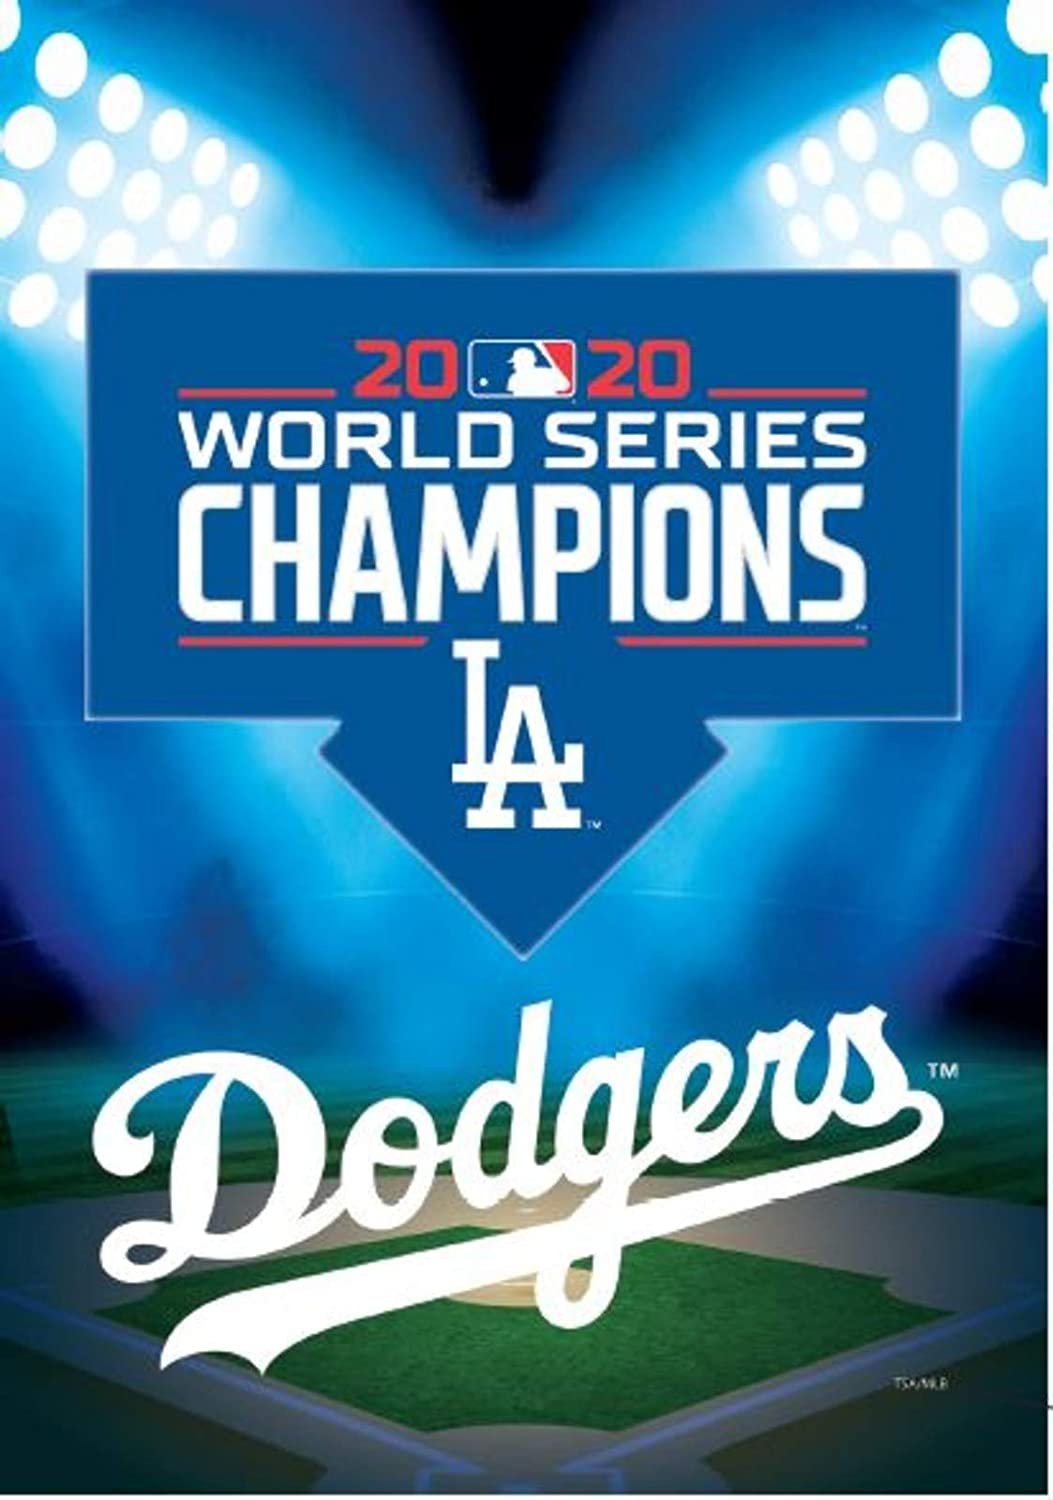 Los Angeles Dodgers 2020 Champions Premium Double Sided Banner House Flag, 28x44 Inch